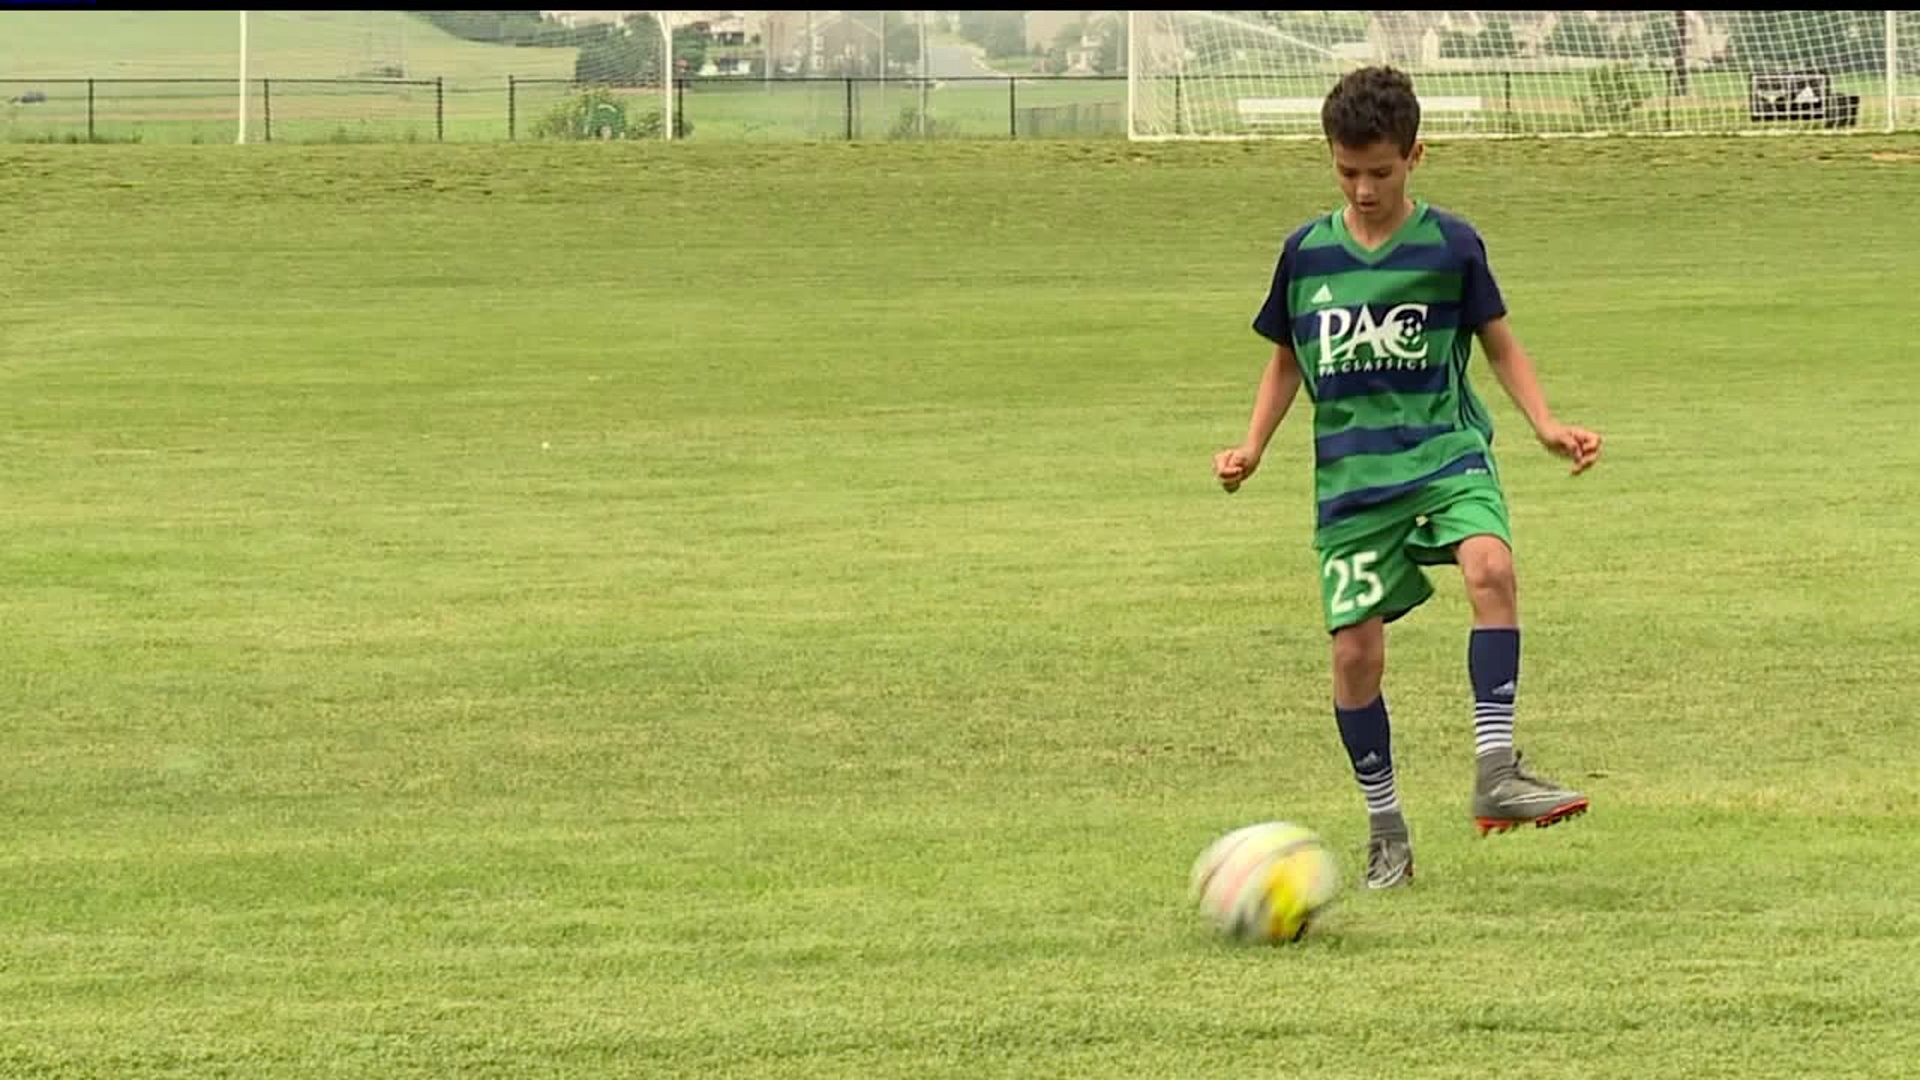 Local youth soccer play in Russia for World Cup